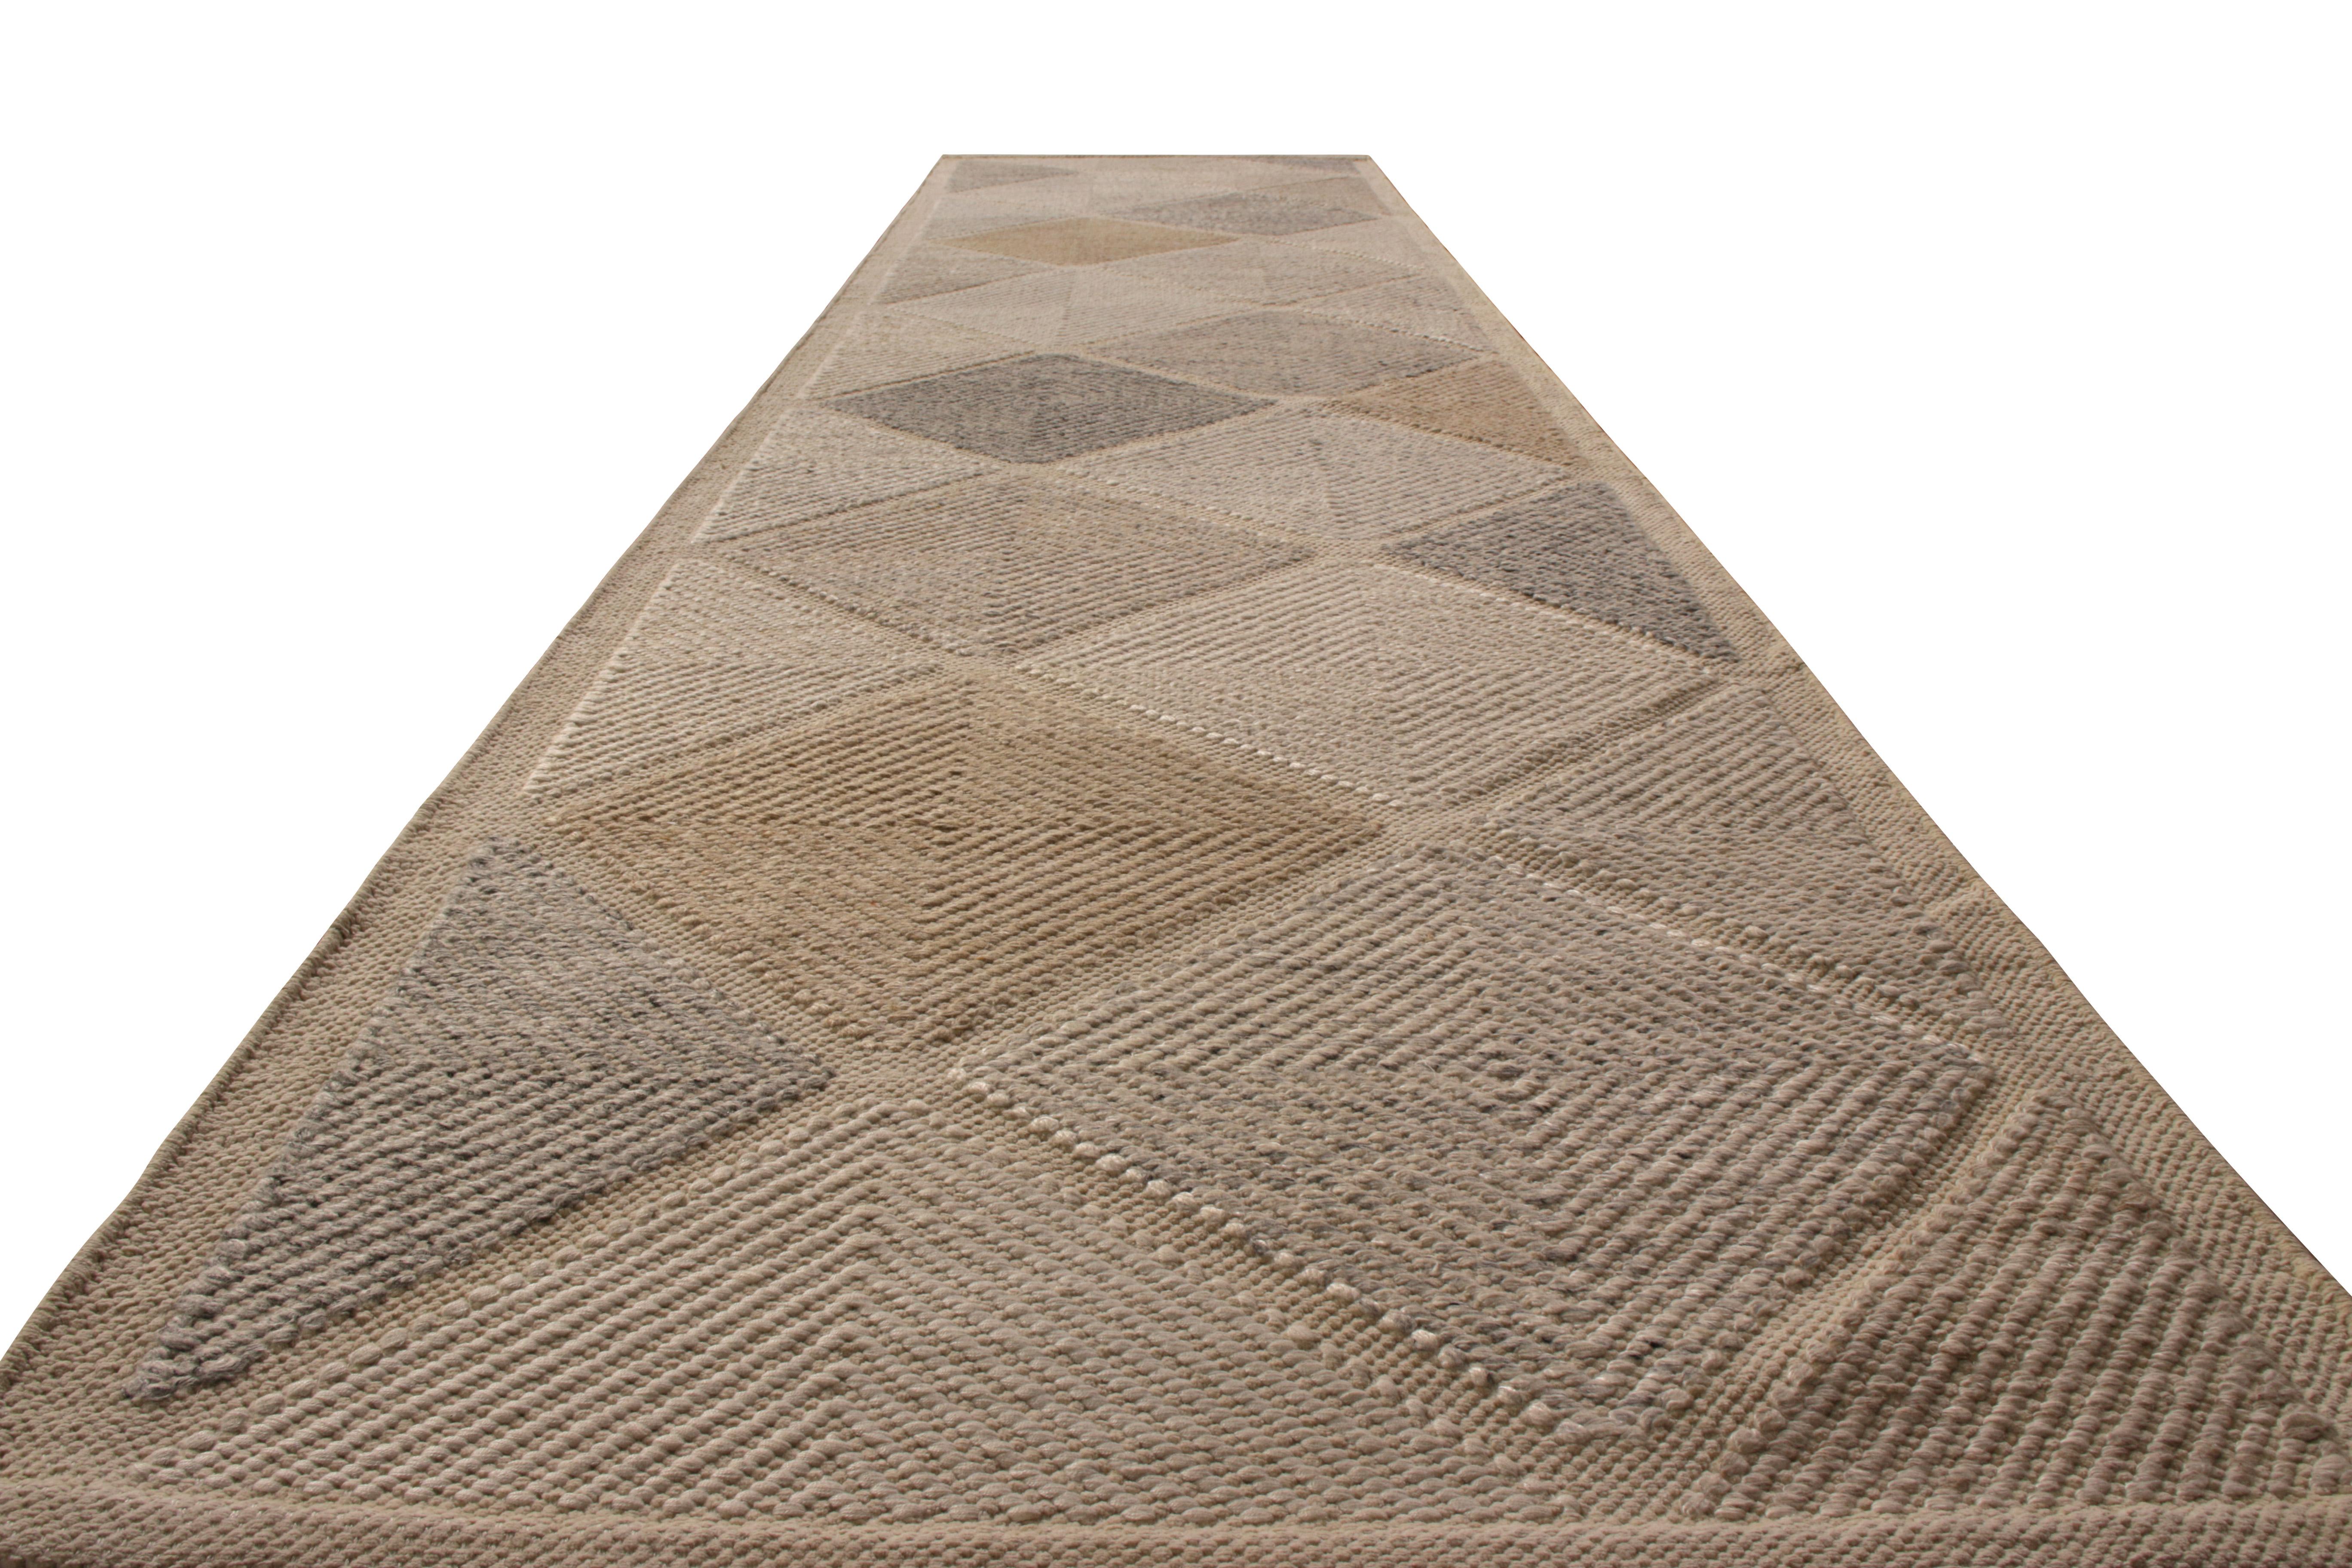 Handwoven in wool with a blend of undyed natural yarns, this 3 x 13 modern flat-weave runner joins the latest additions to the Scandinavian collection by Rug & Kilim, a celebration of Swedish modernism with new large scale geometry and exciting